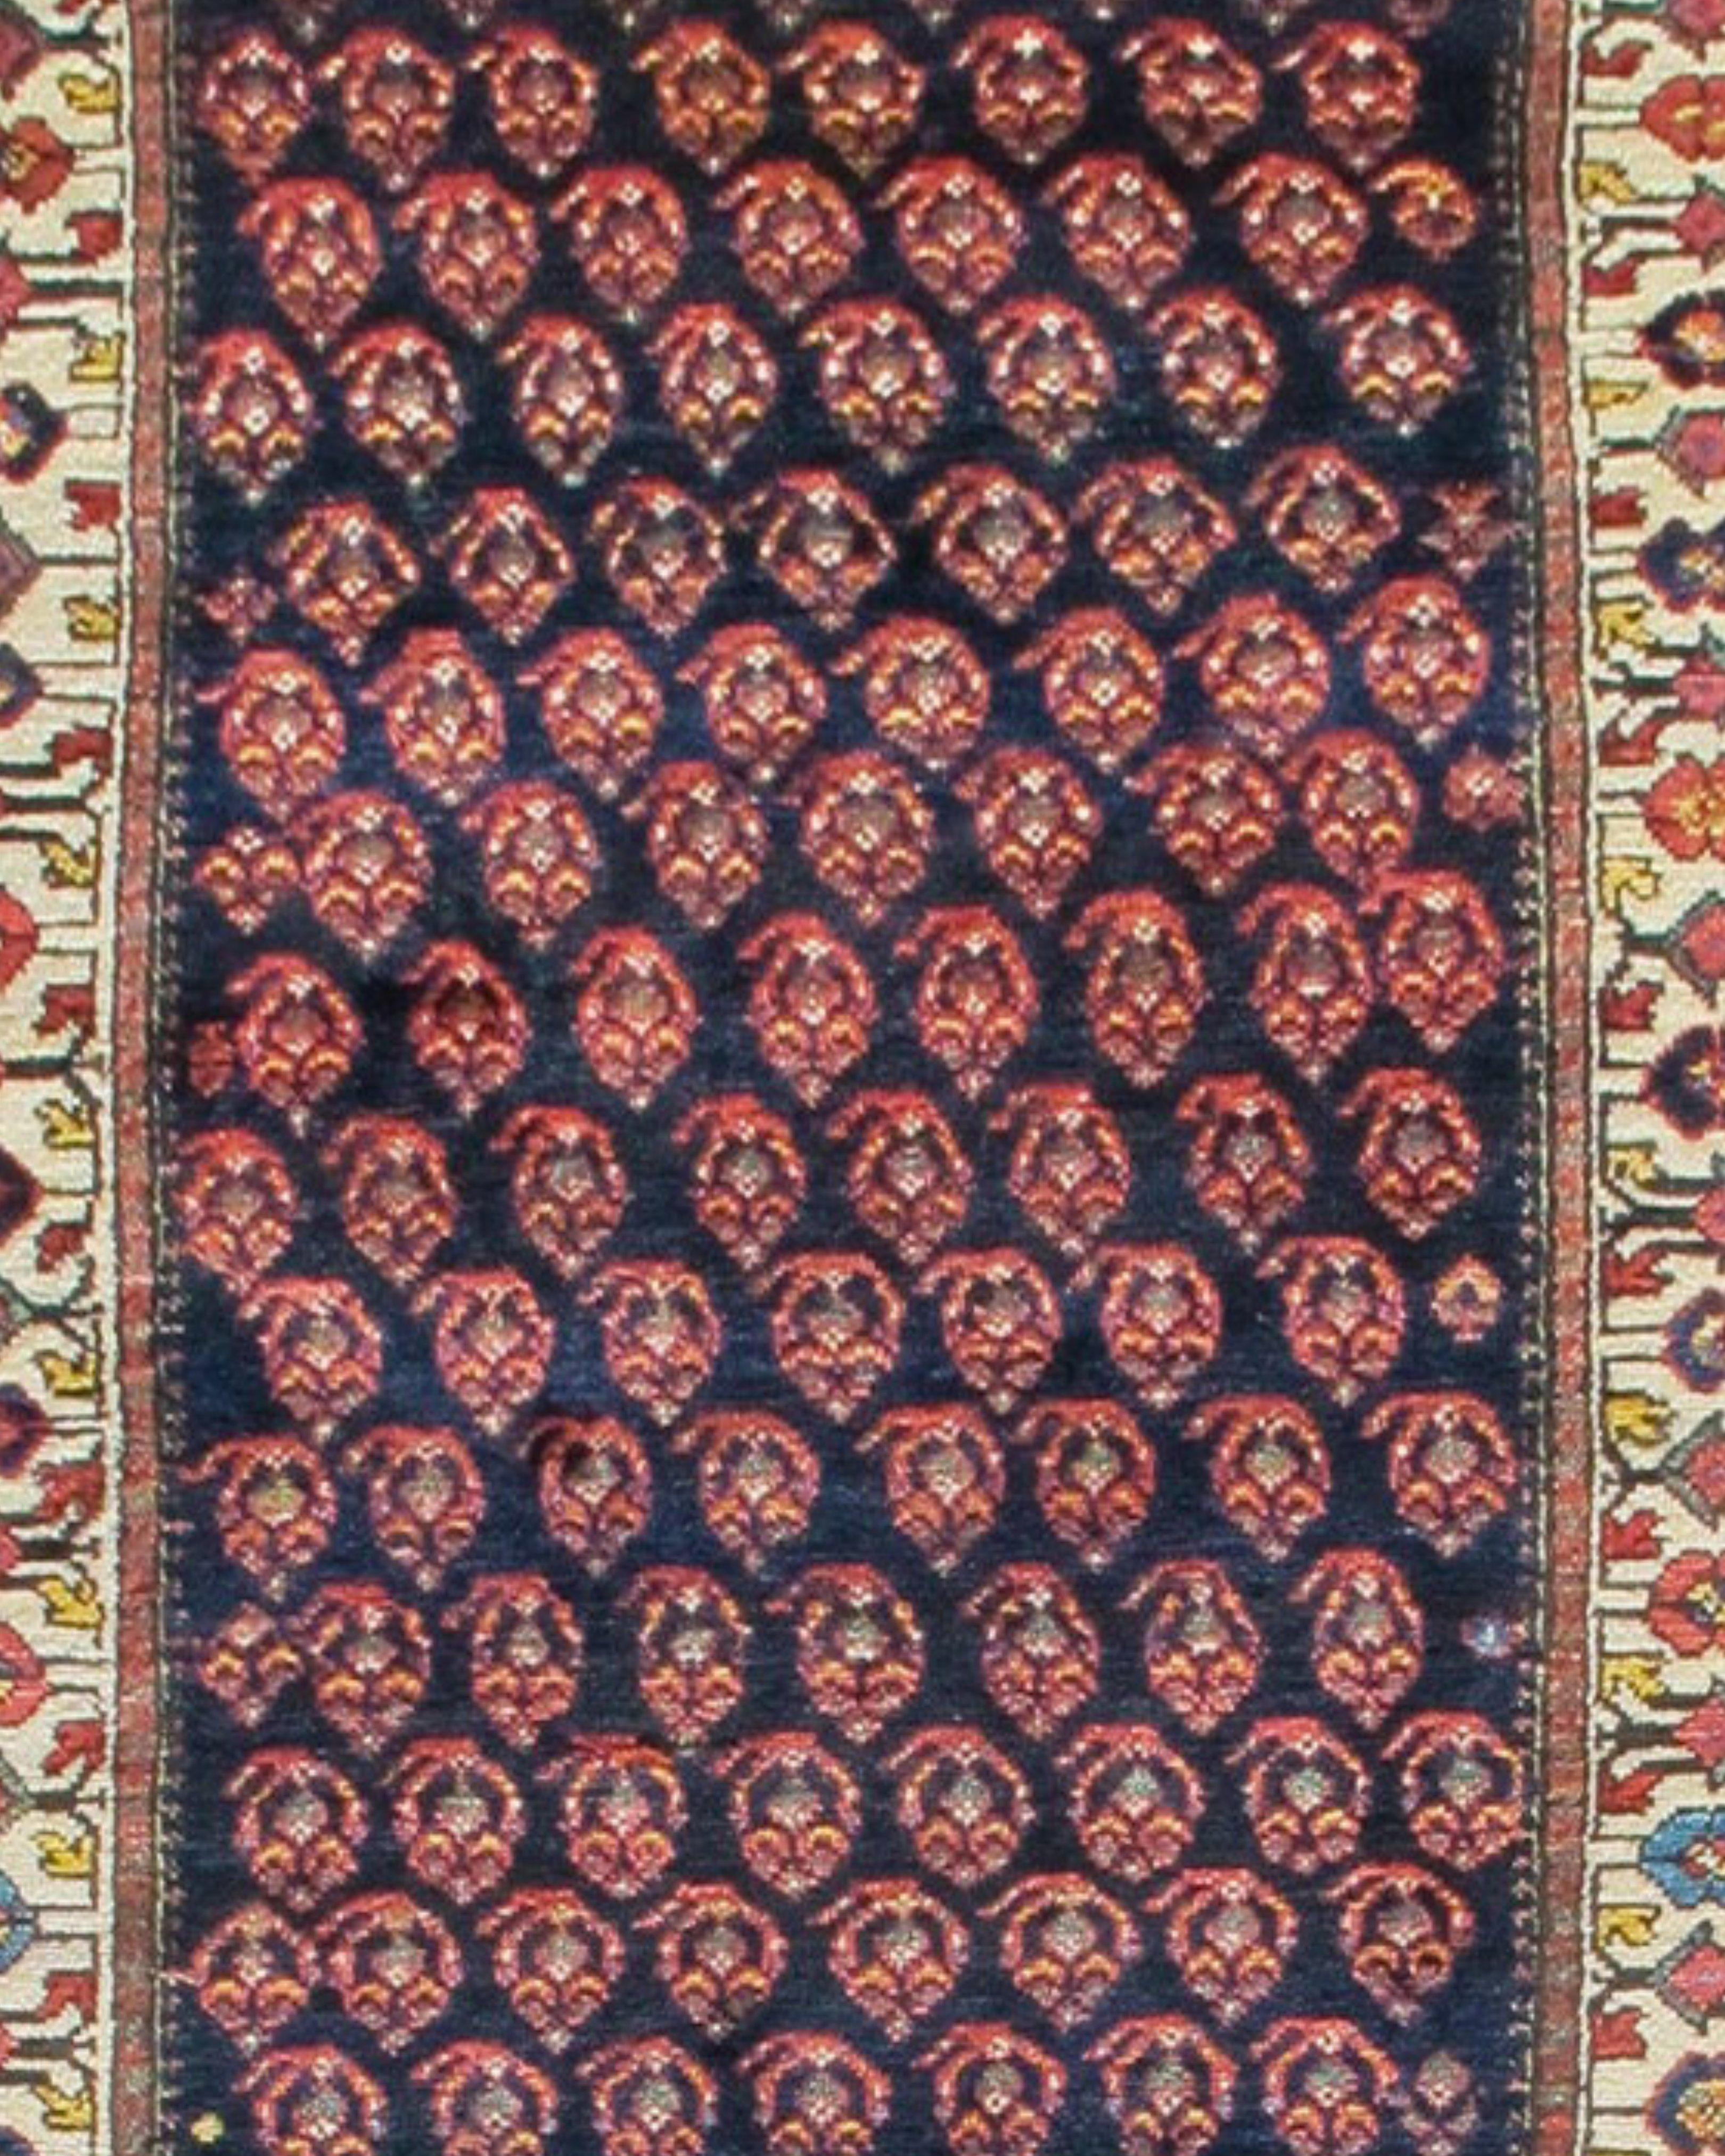 Antique Caucasian Shirvan Runner Rug, Late 19th Century

Additional Information:
Dimensions: 3'1